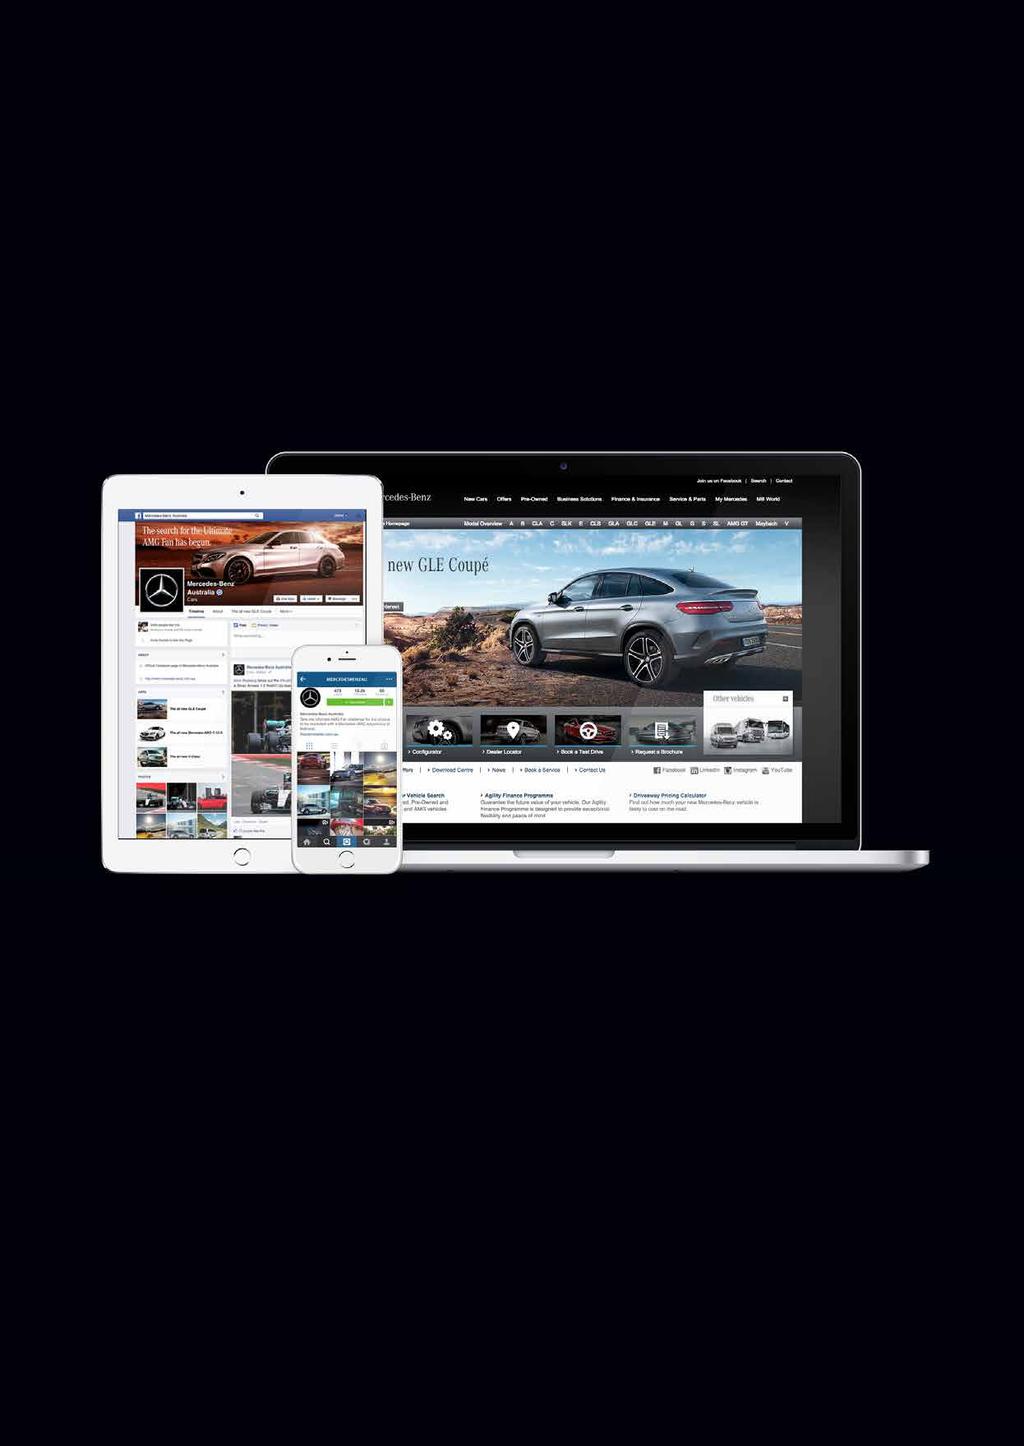 Stay up to date with Mercedes-Benz Australia. www.mercedes-benz.com.